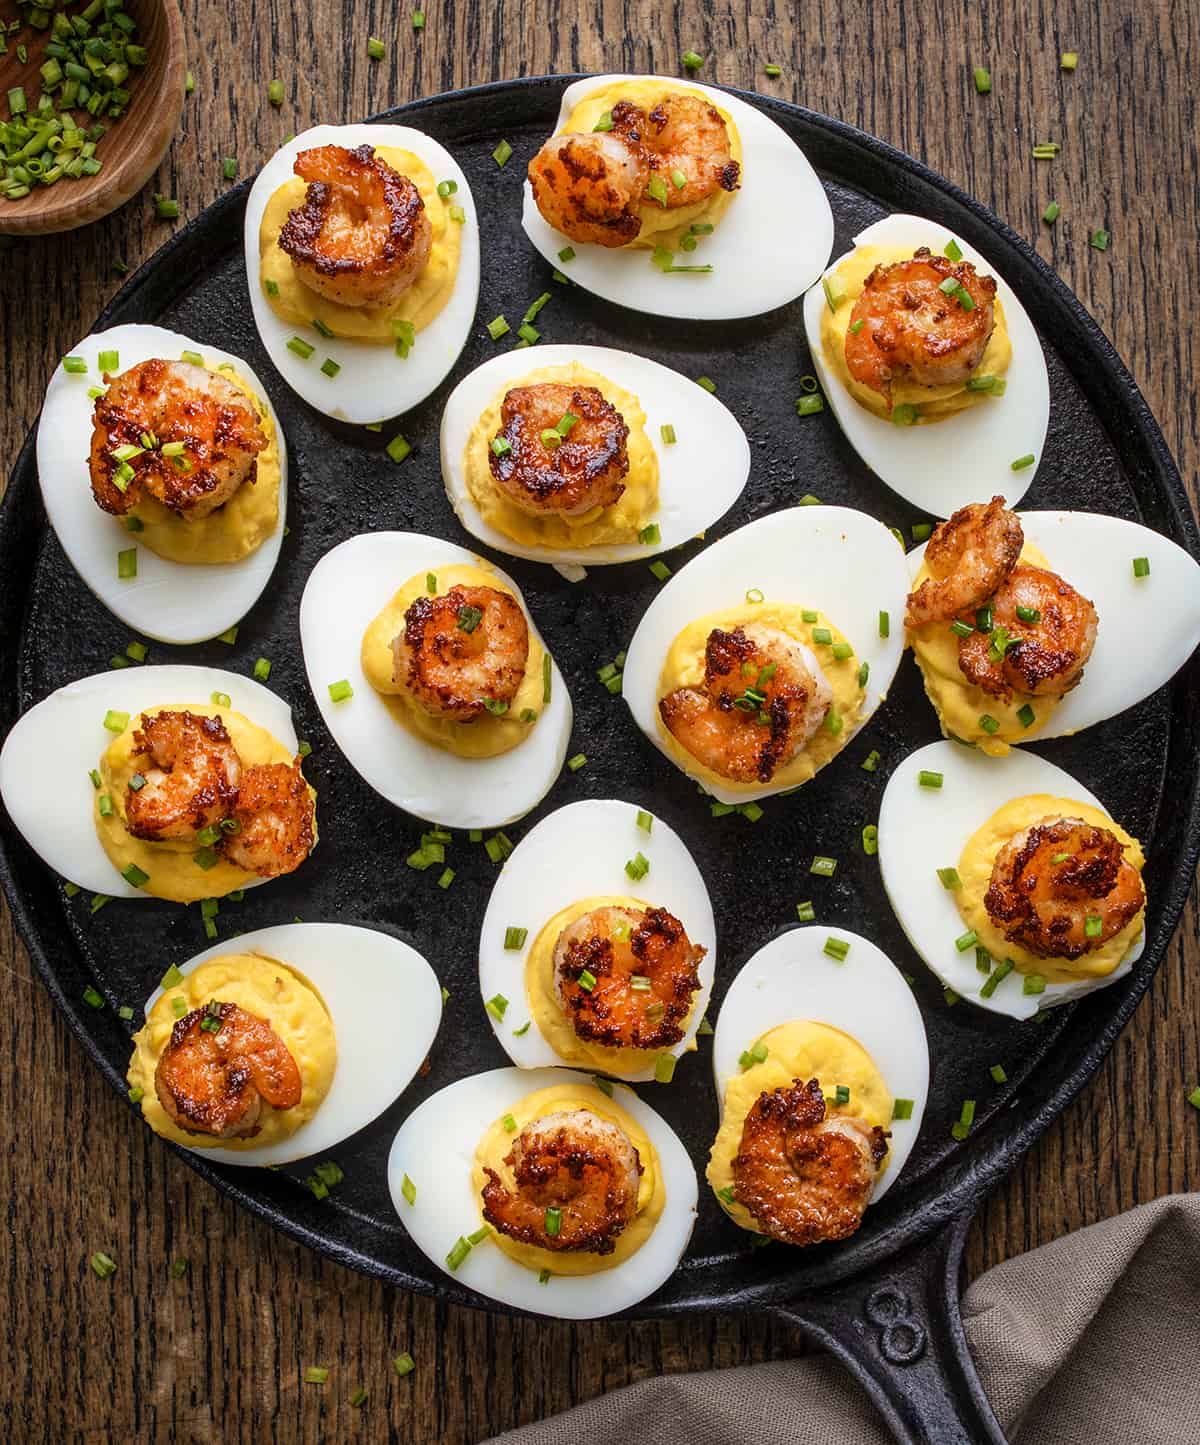 Pan of Cajun Shrimp Deviled Eggs on a Table from Overhead.